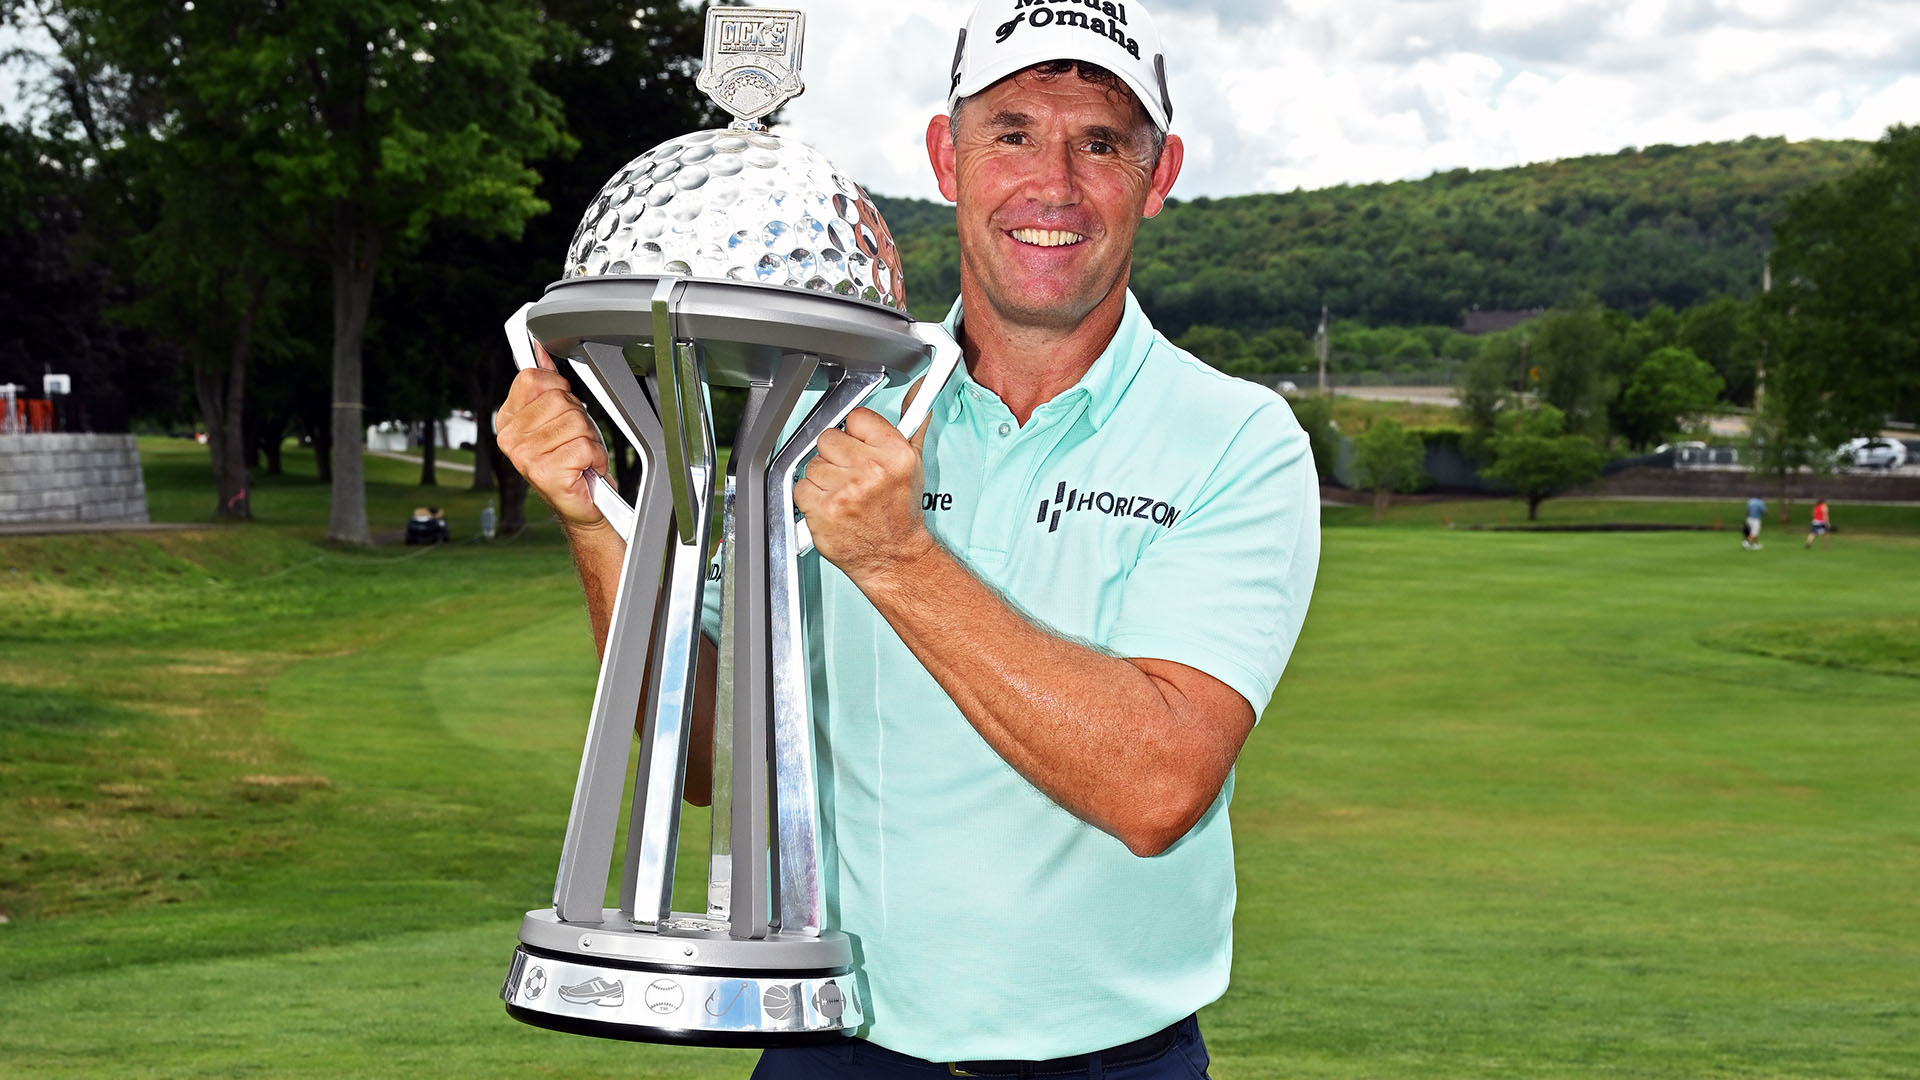 Padraig Harrington goes back-to-back at Dick’s Sporting Goods Open with big finish